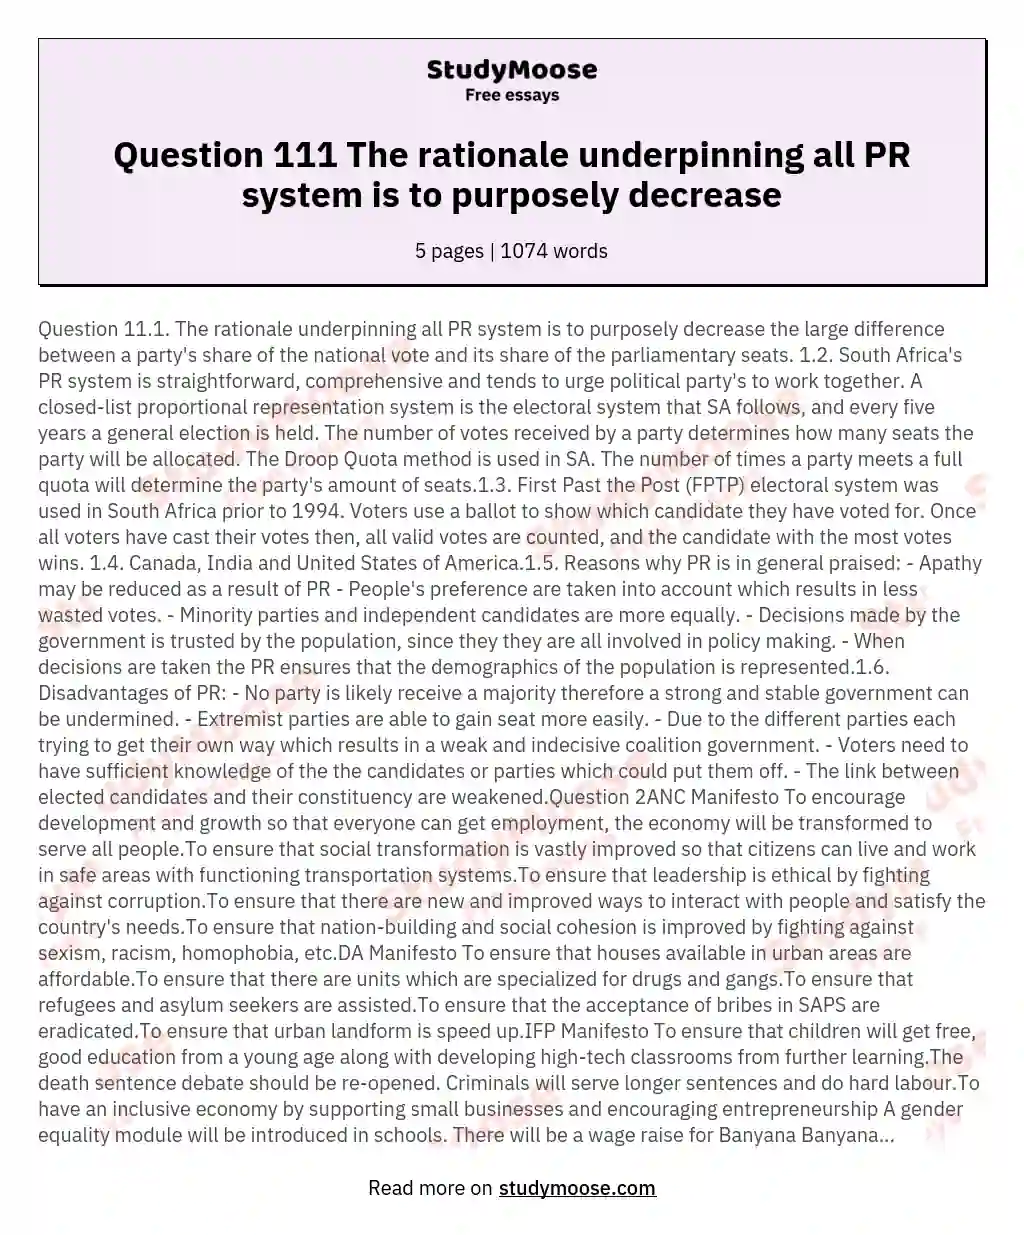 Question 111 The rationale underpinning all PR system is to purposely decrease essay